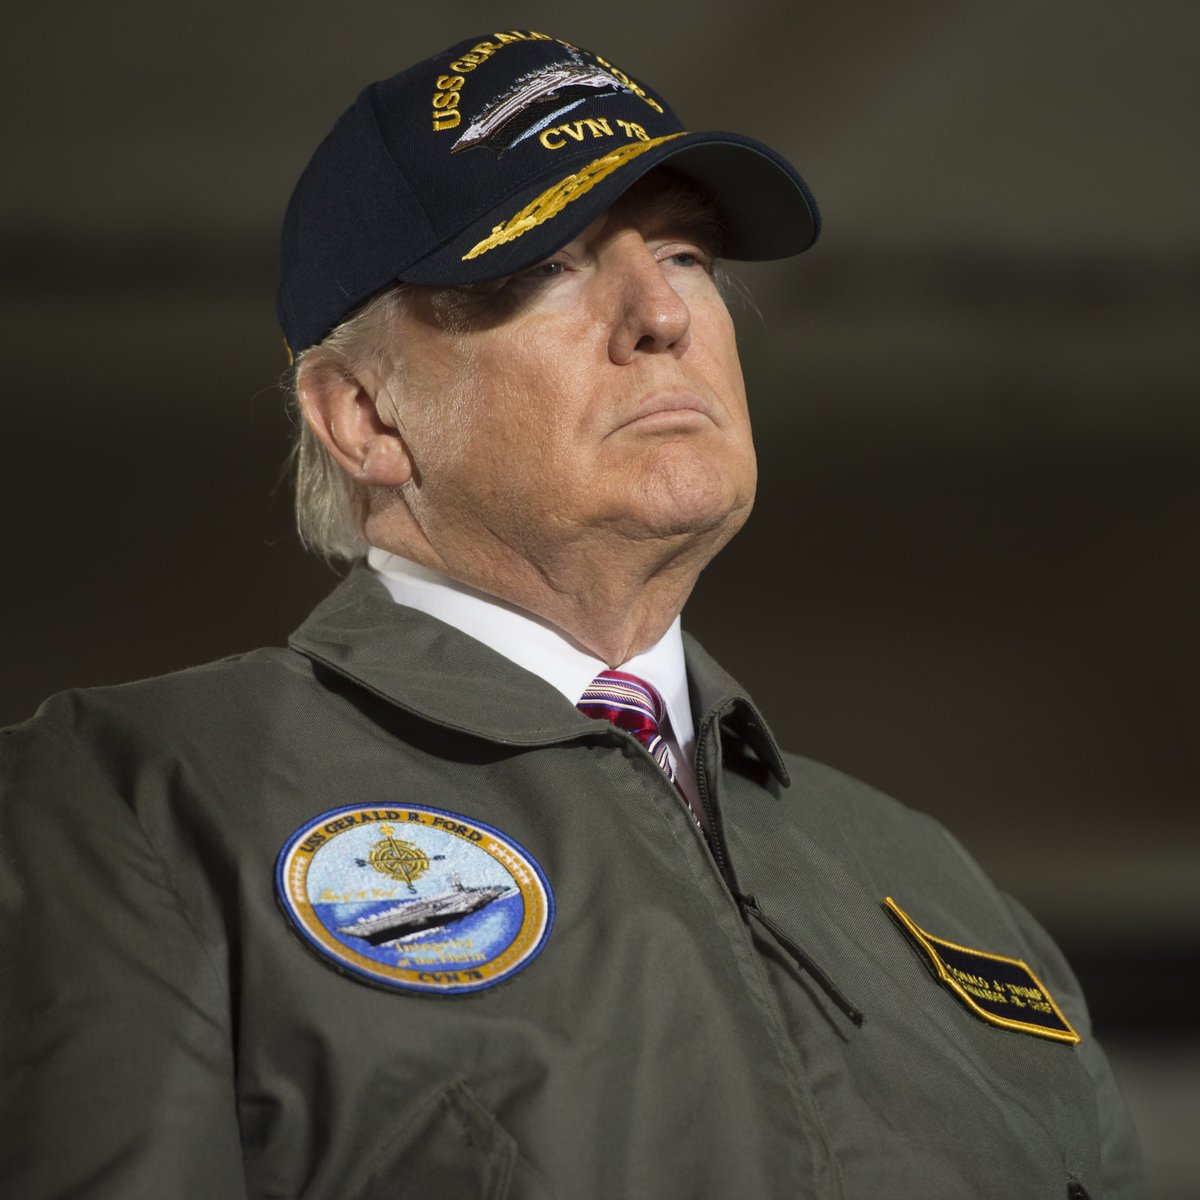 Do you agree Donald Trump was a more intelligent and stronger Commander in Chief compared to Joe Biden and Barack Obama? YES or NO? If YES, I will follow you back! 🇺🇸